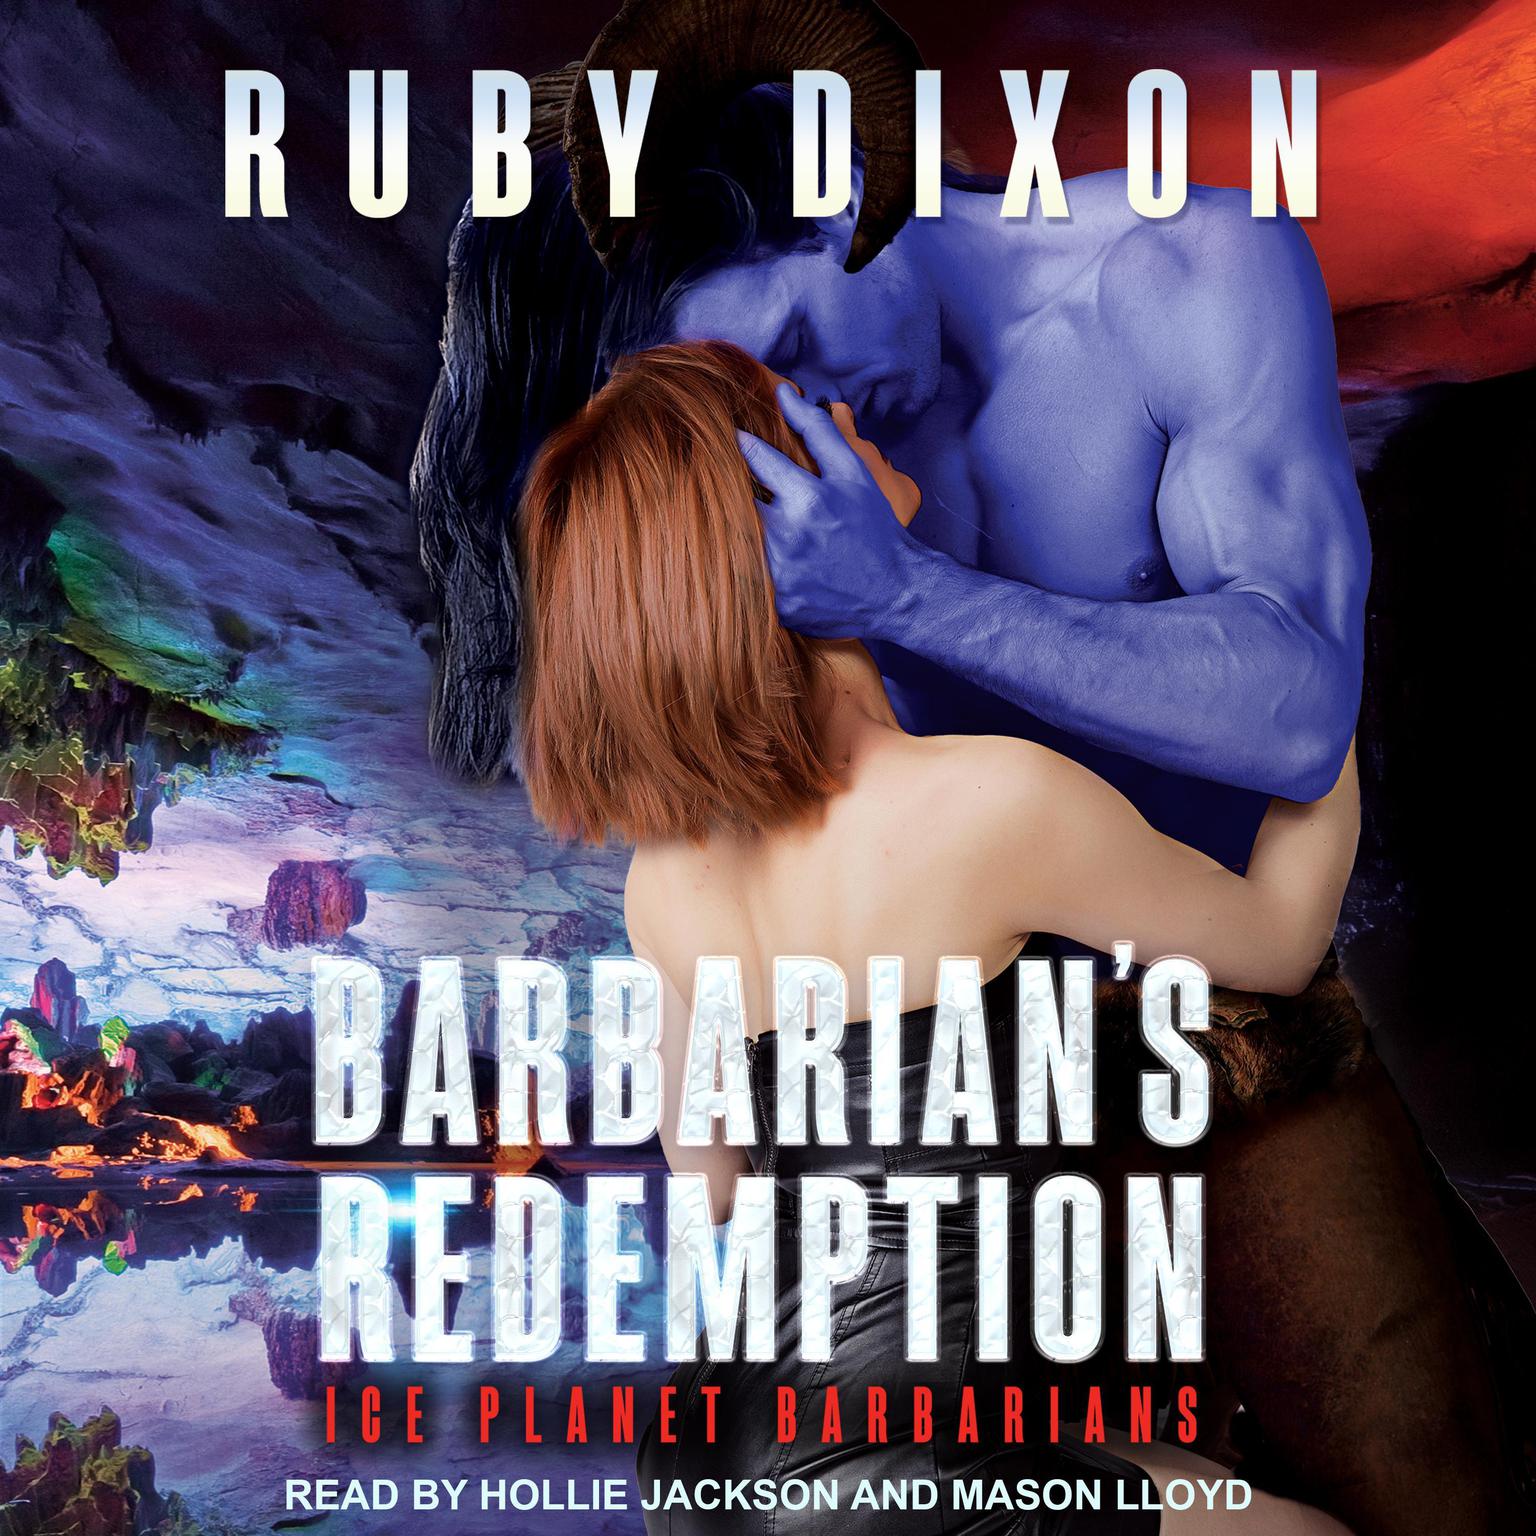 Barbarians Redemption: Ice Planet Barbarians Audiobook, by Ruby Dixon